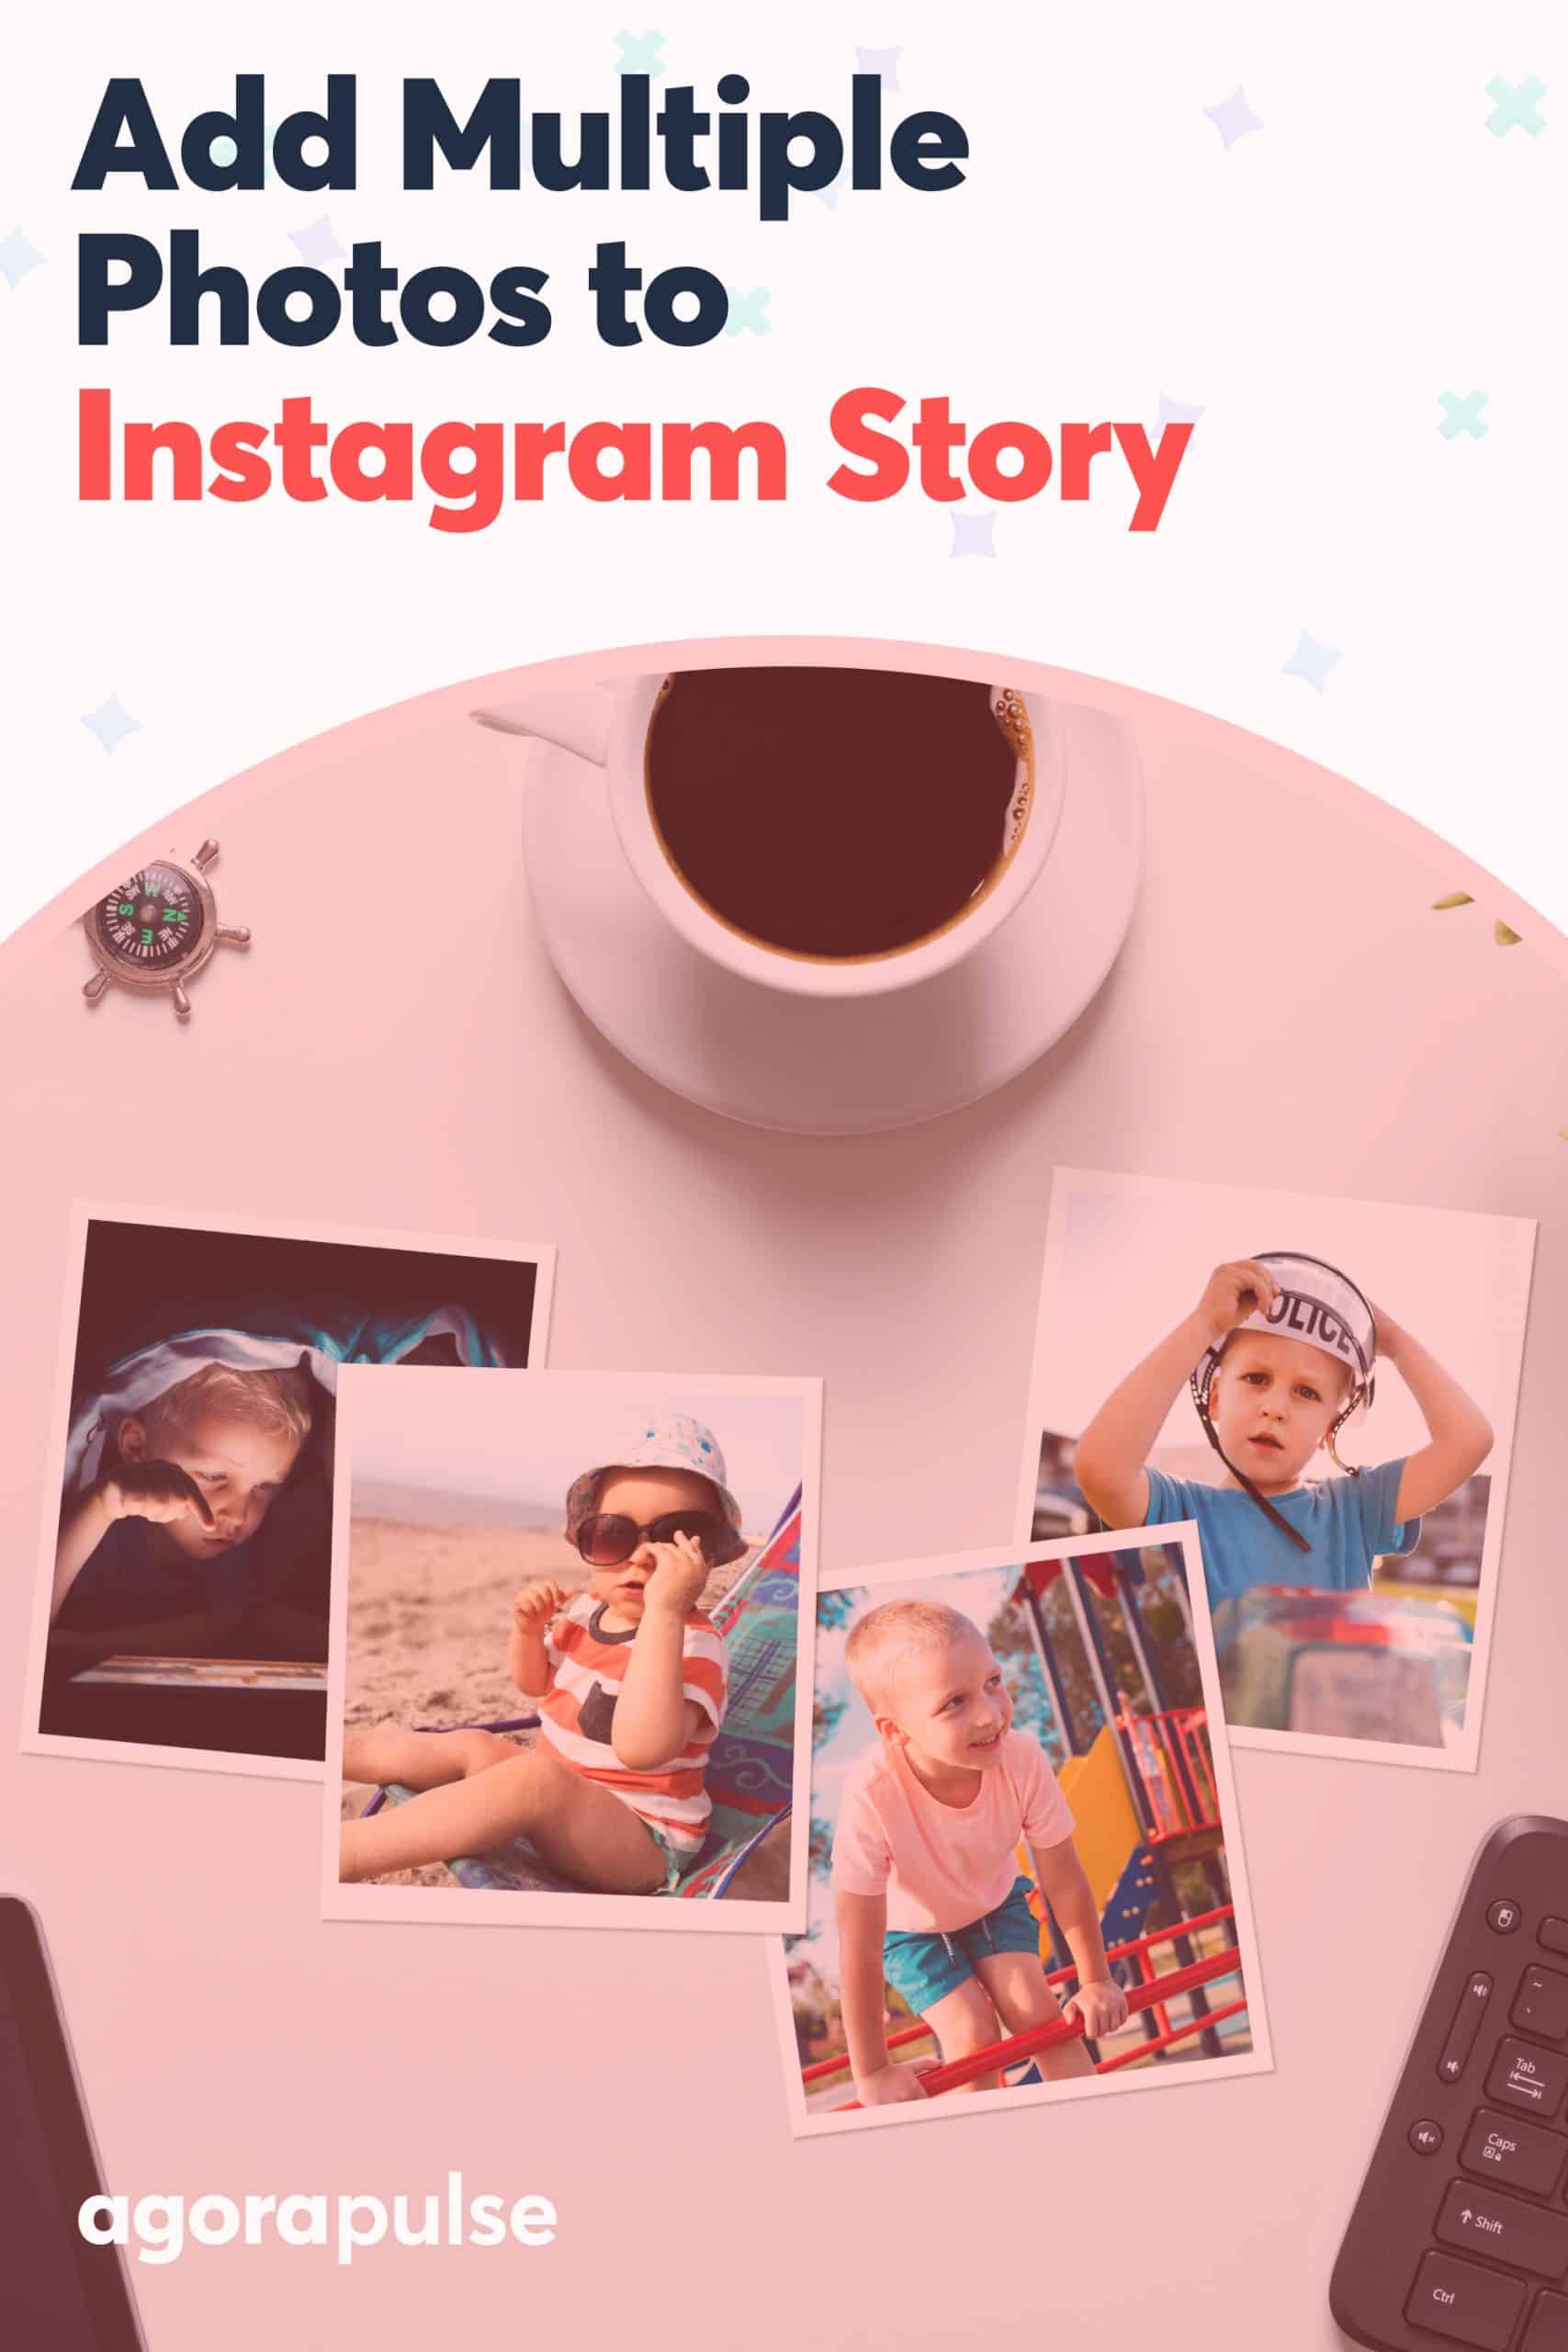 How Do I Add Multiple Photos to An Instagram Story?